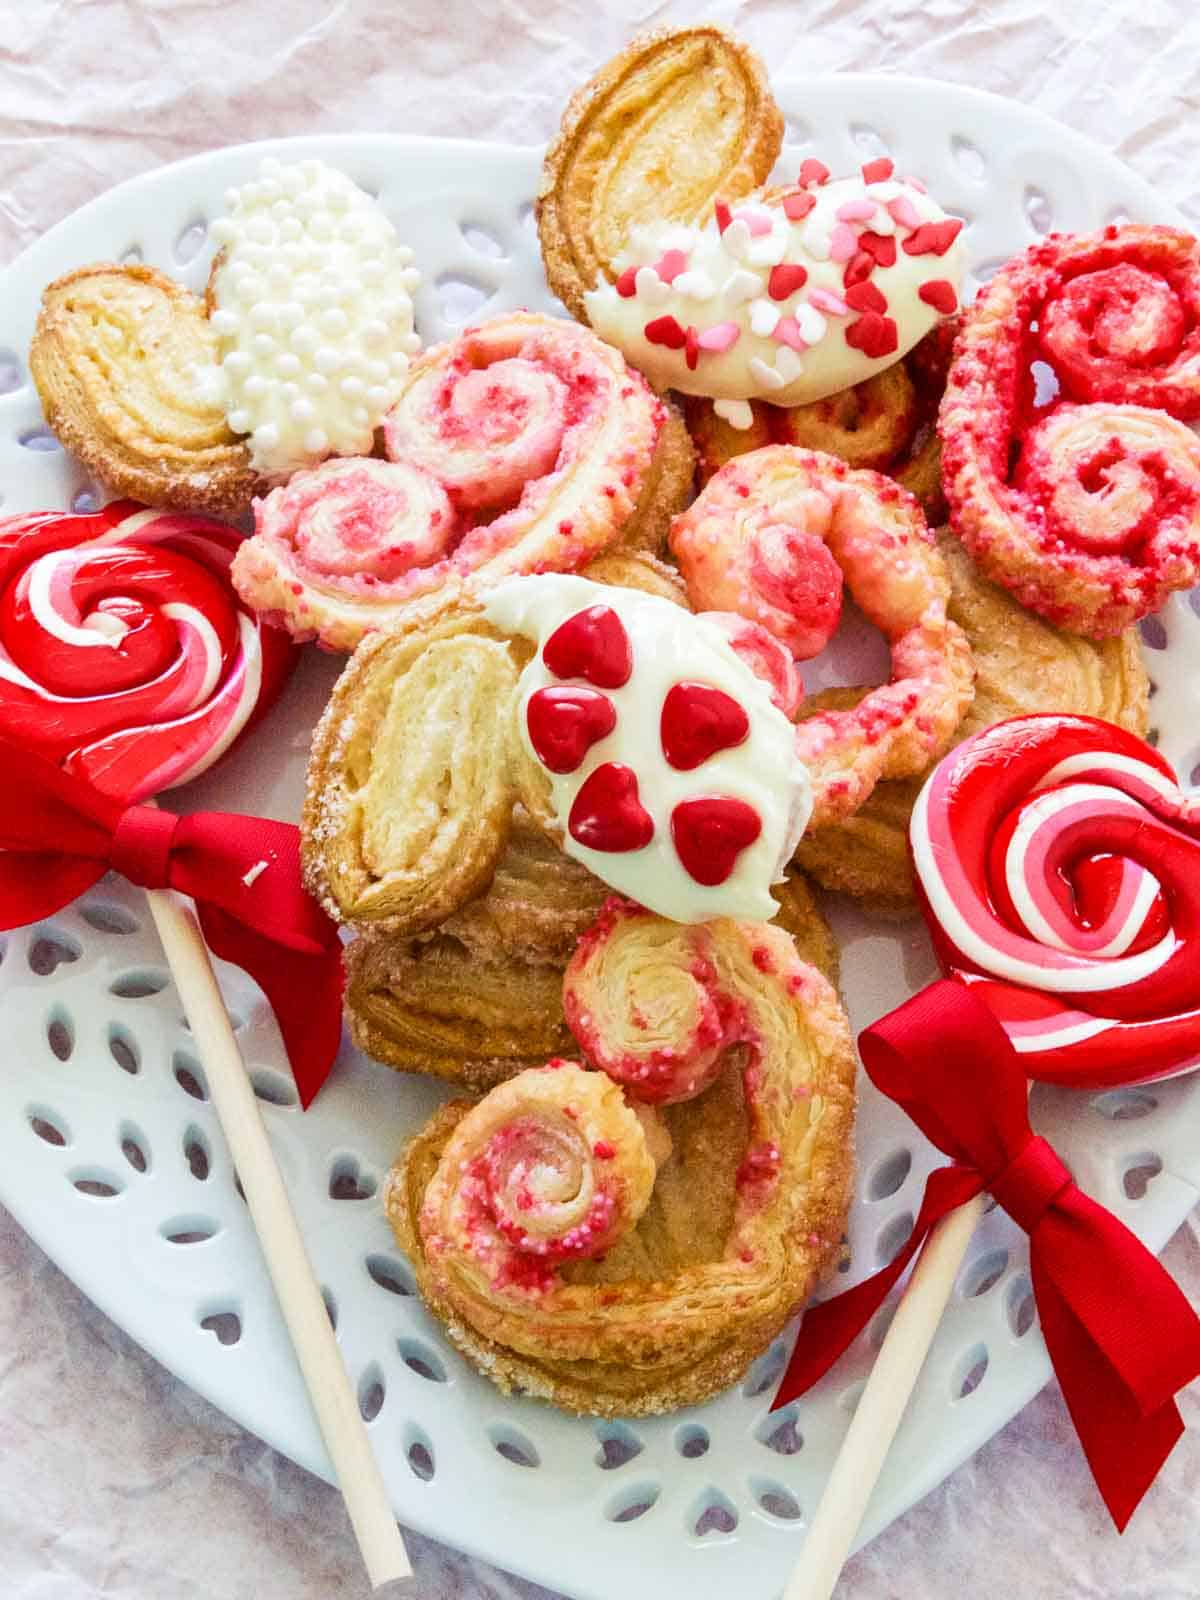 https://www.delicioustable.com/wp-content/uploads/2022/01/Heart-shaped-palmier-Valentines-cookies.jpg